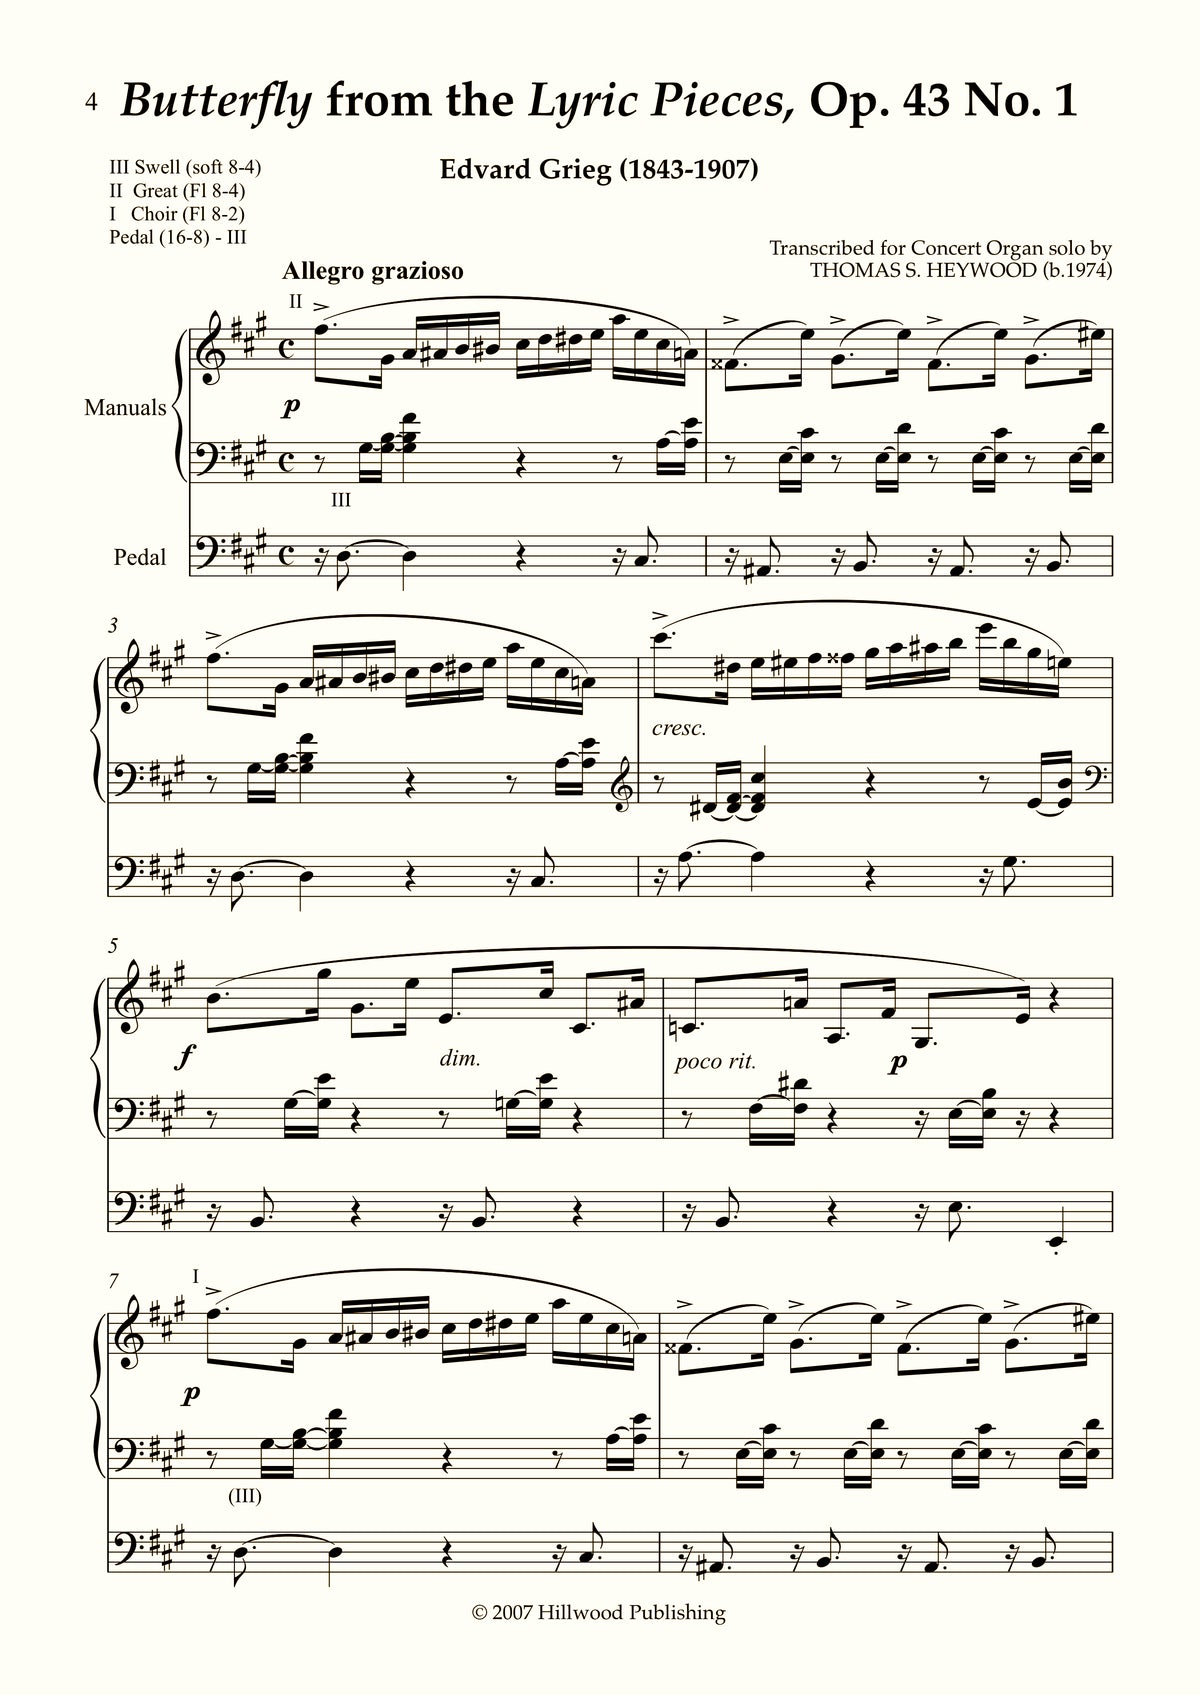 Grieg/Heywood - Butterfly from the Lyric Pieces, Op. 43 No. 1 (Score)